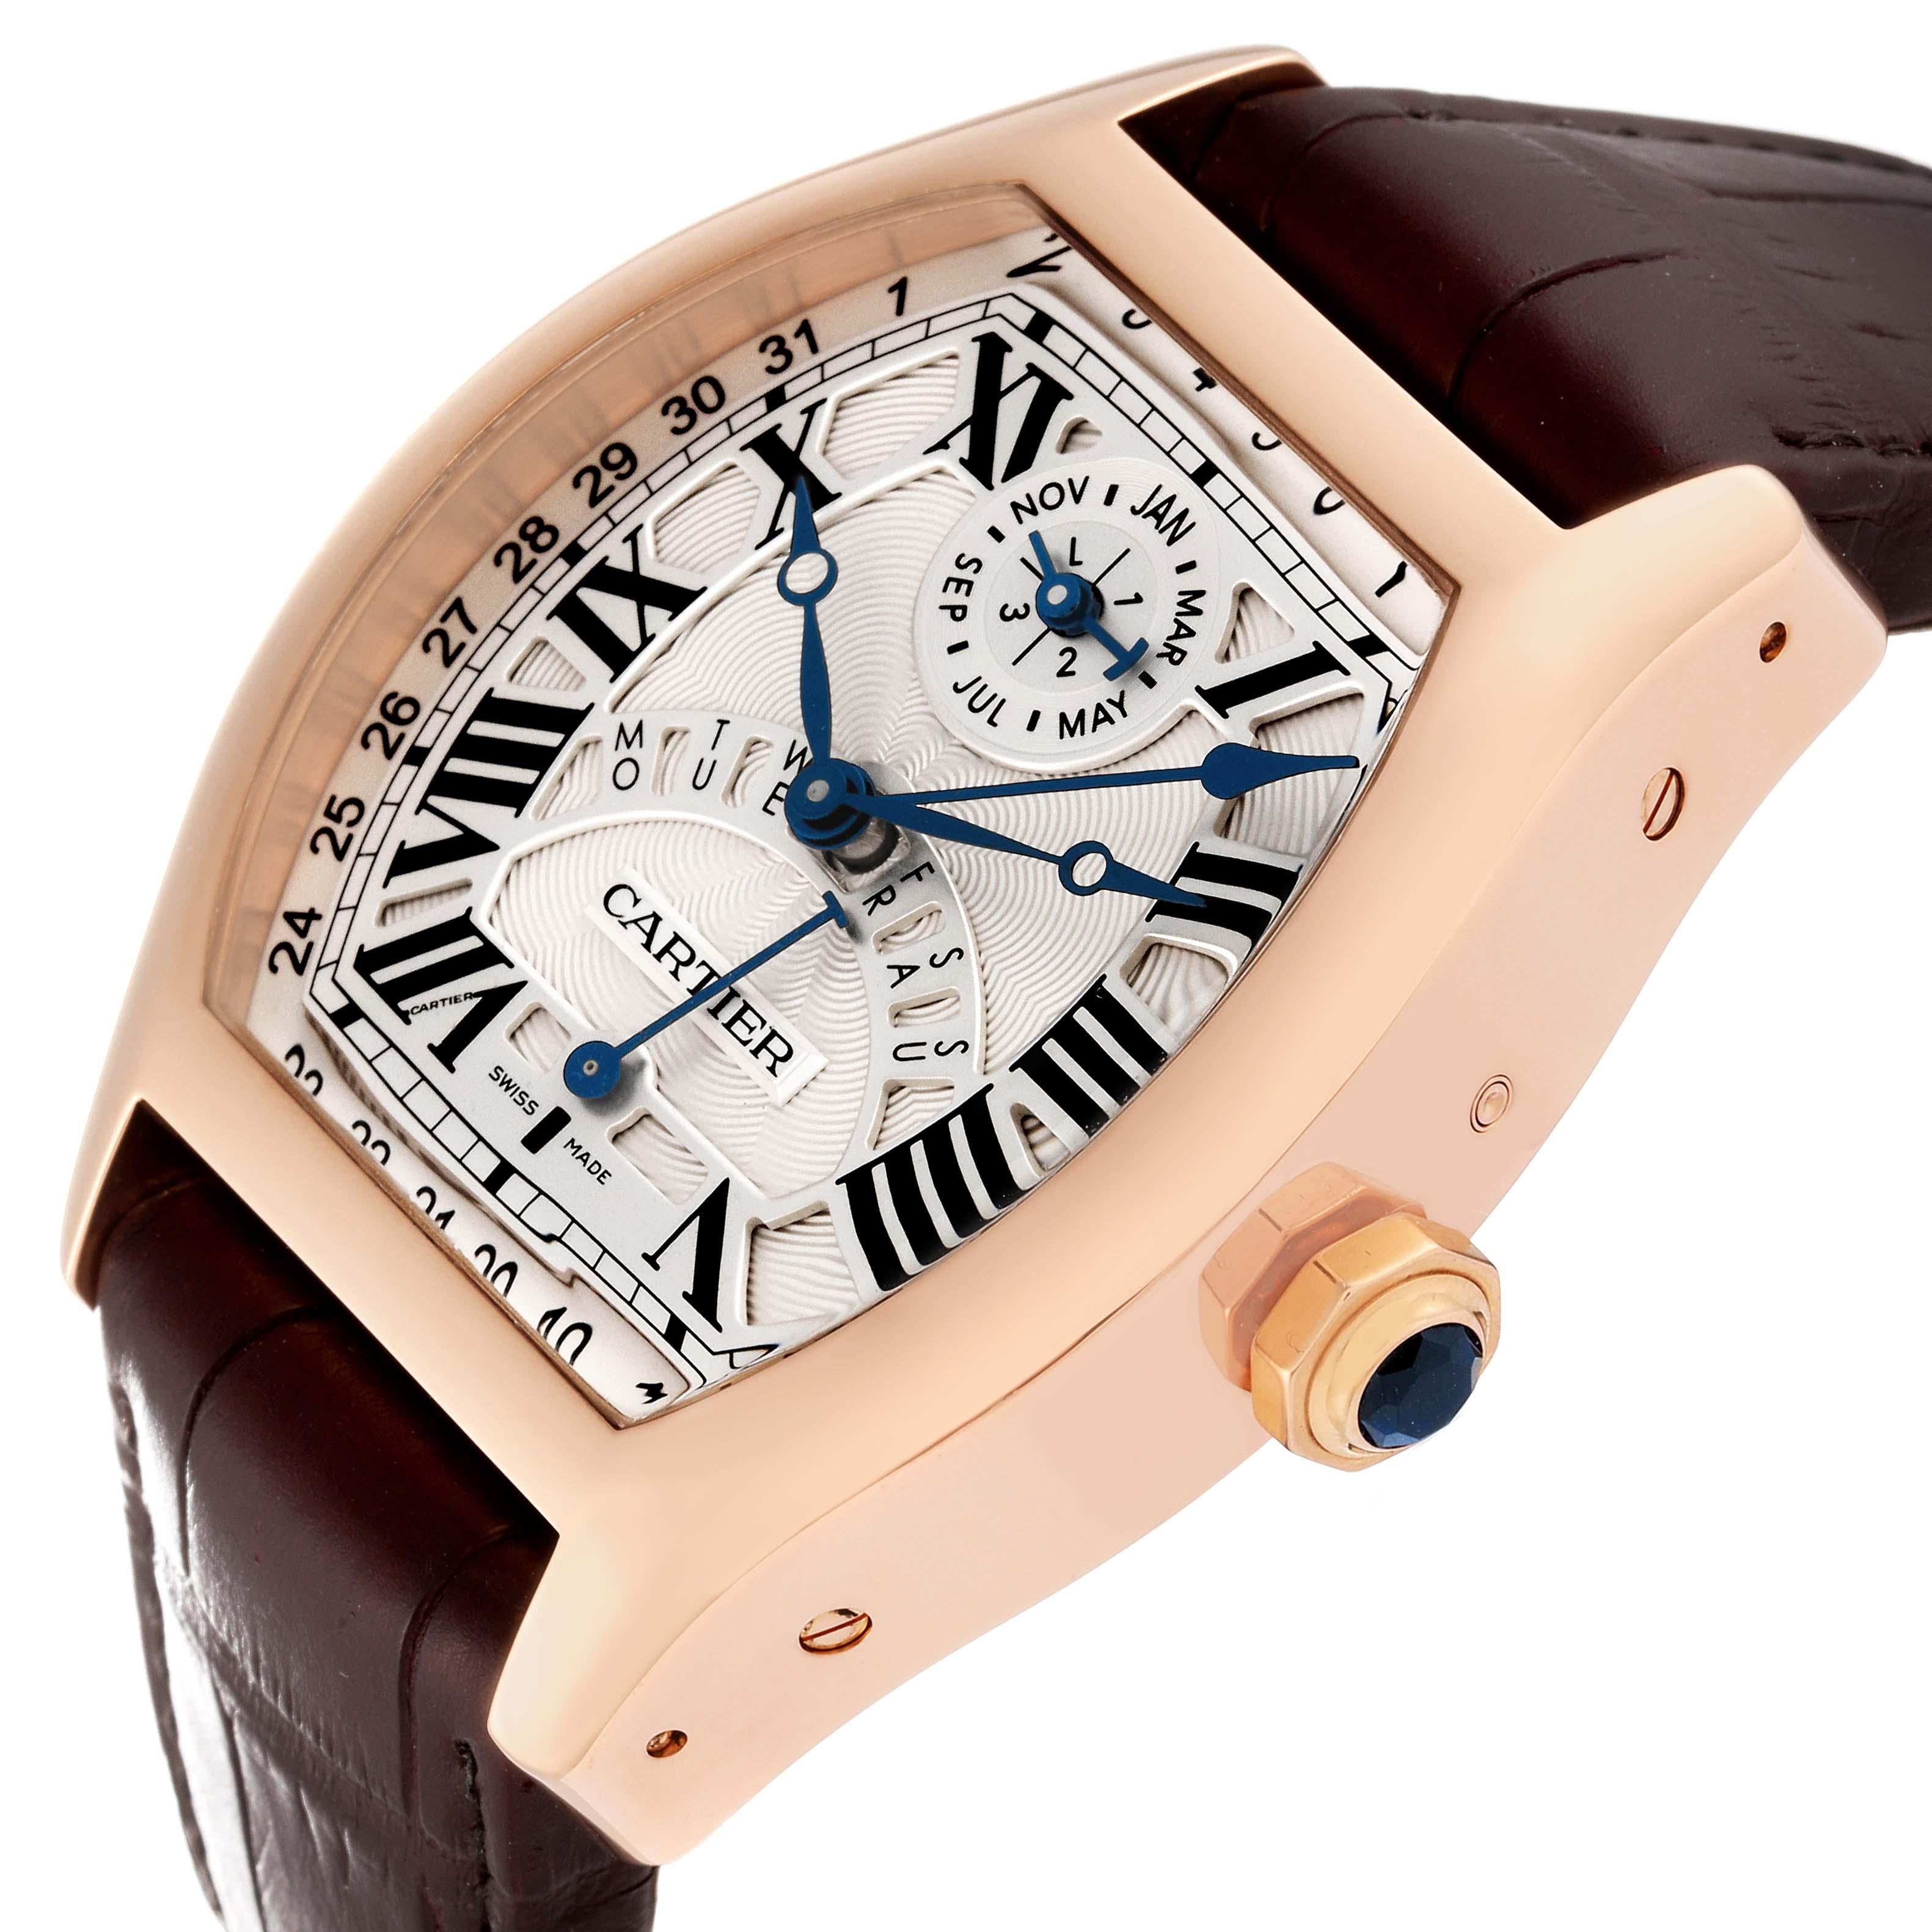 Cartier Tortue Perpetual Calendar Automatic Rose Gold Mens Watch W1580045. Self-winding automatic movement. 18k rose gold Tonneau shape case 45.6 mm x 51 mm. Case thickness is 16.8 mm. Octagonal crown set with a faceted blue sapphire. Transparent